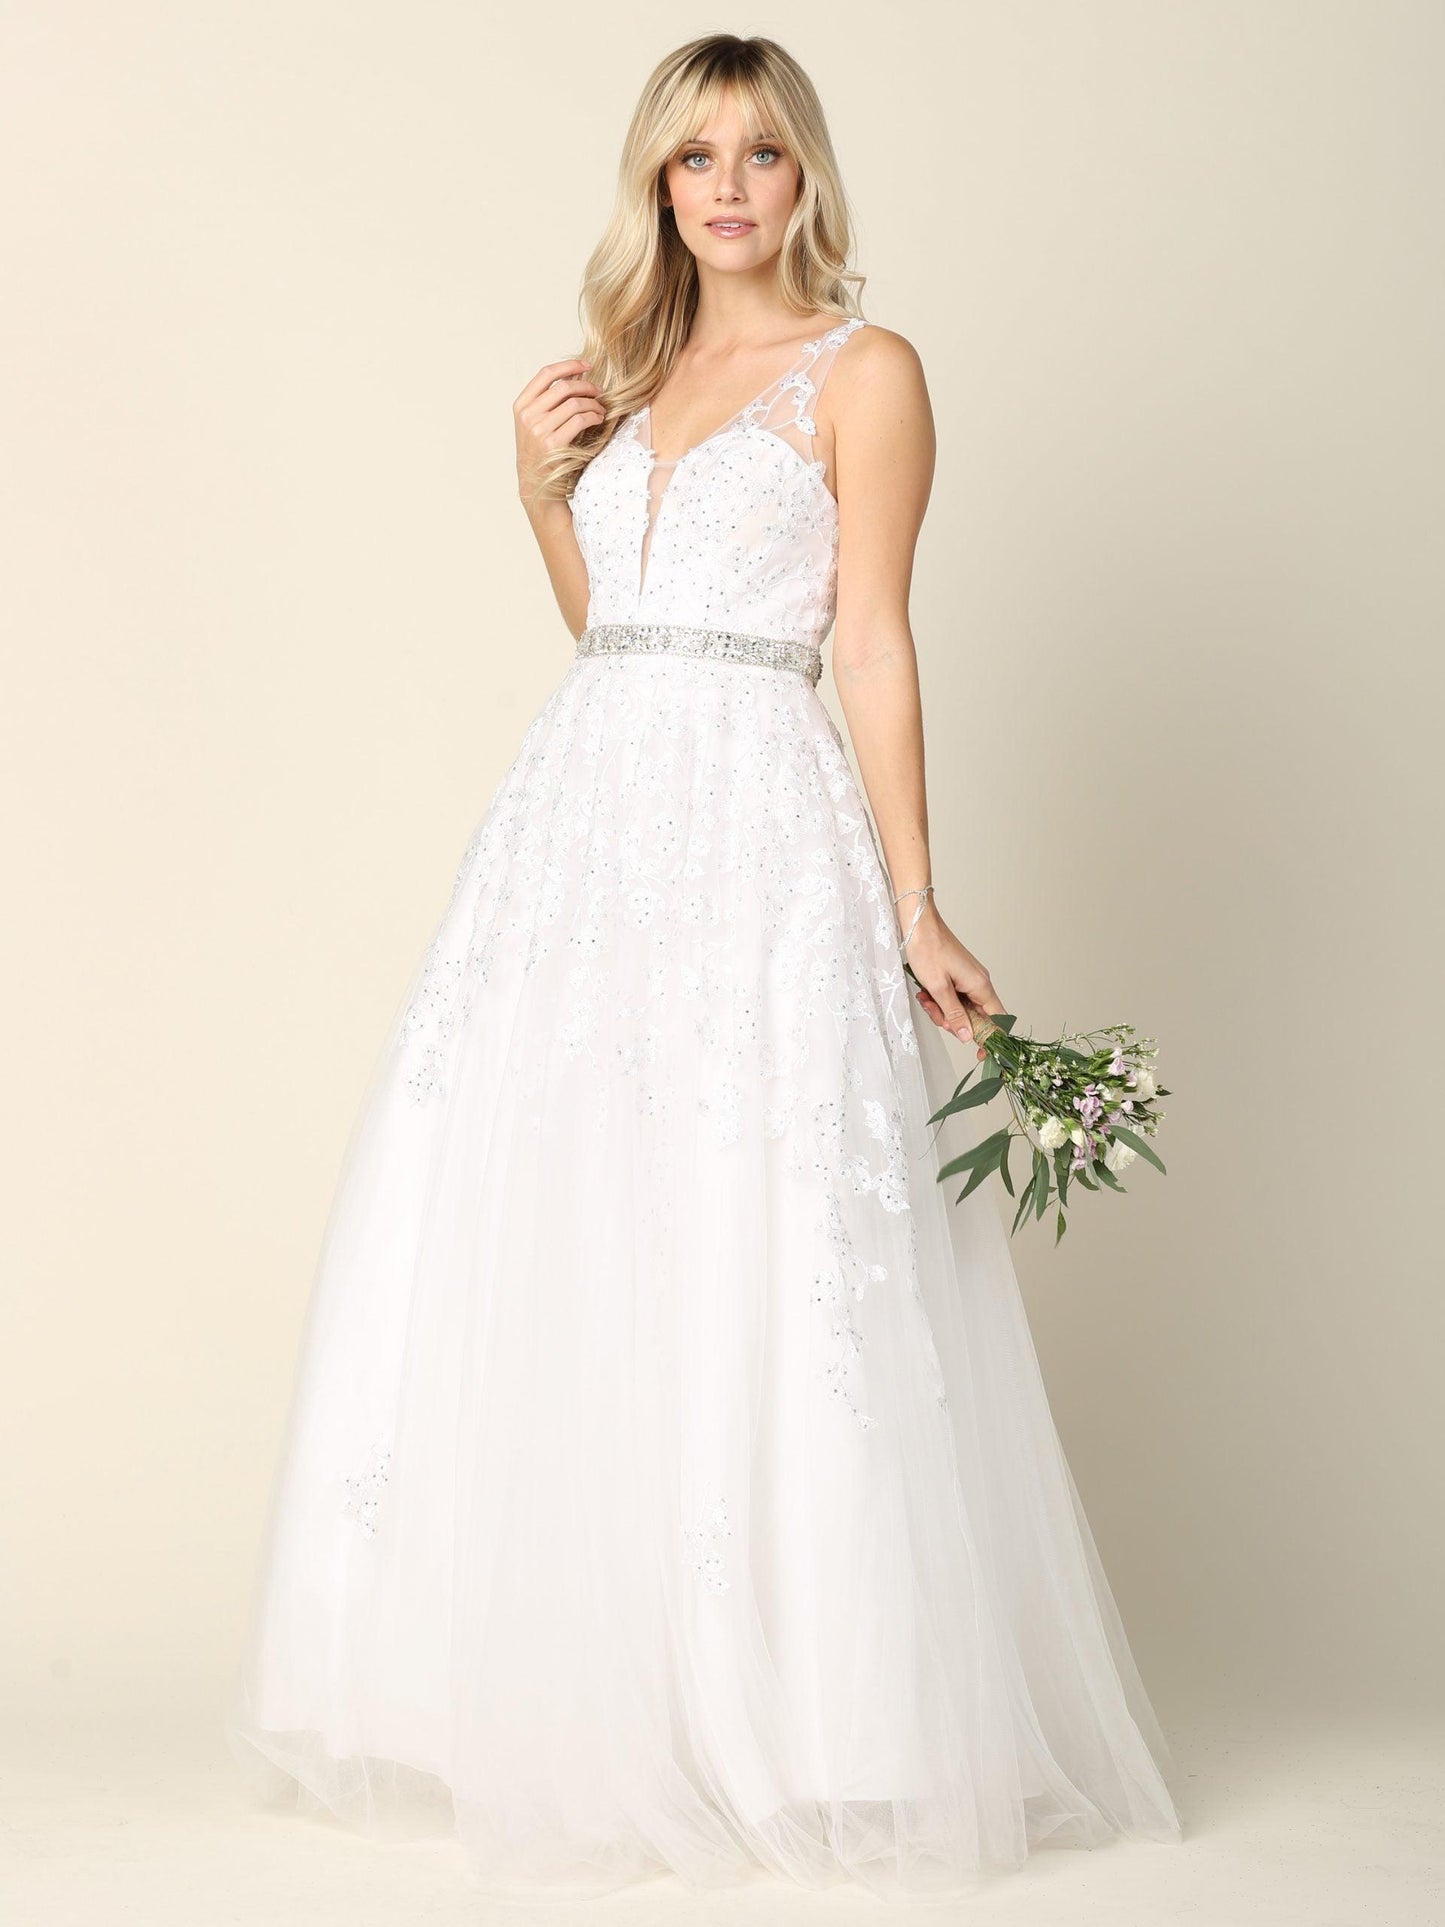 Bridal Long Gown Sleeveless Wedding Dress - The Dress Outlet